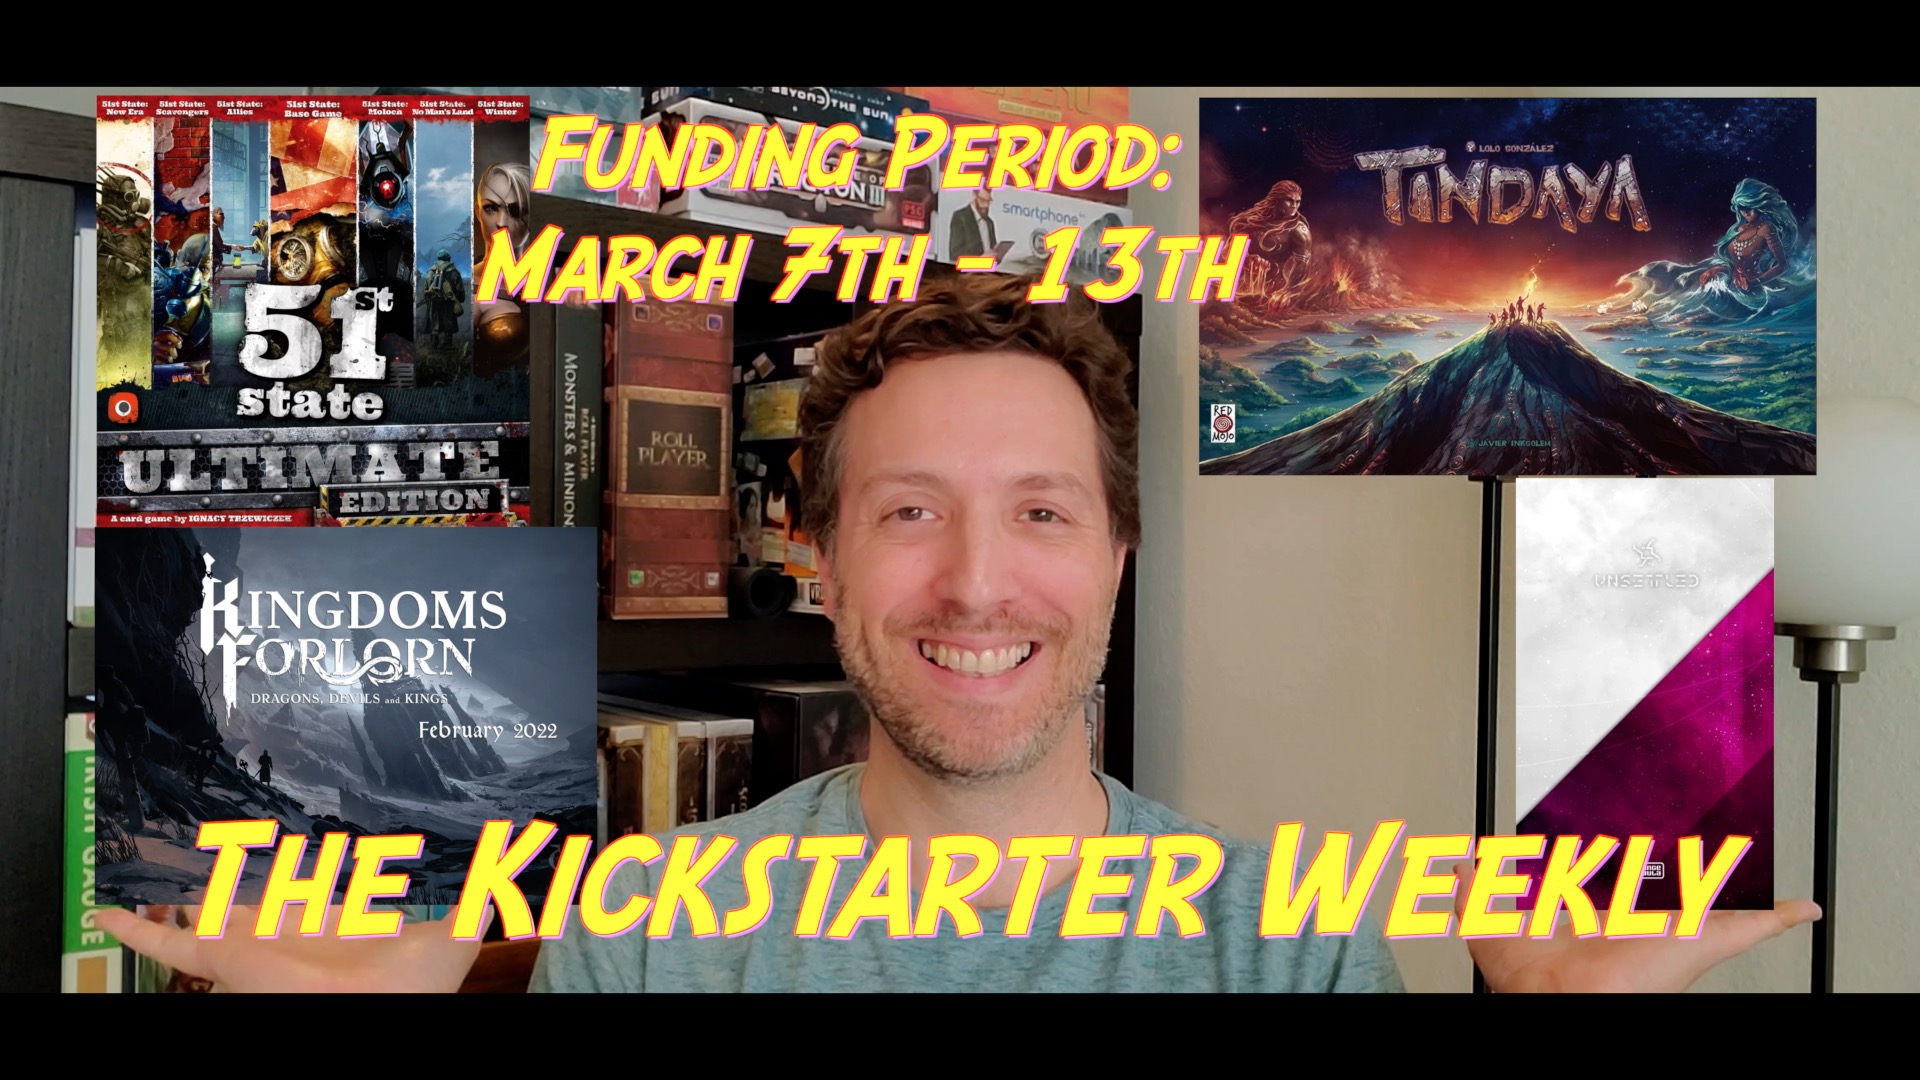 The Kickstarter Weekly, March 7th – 13th